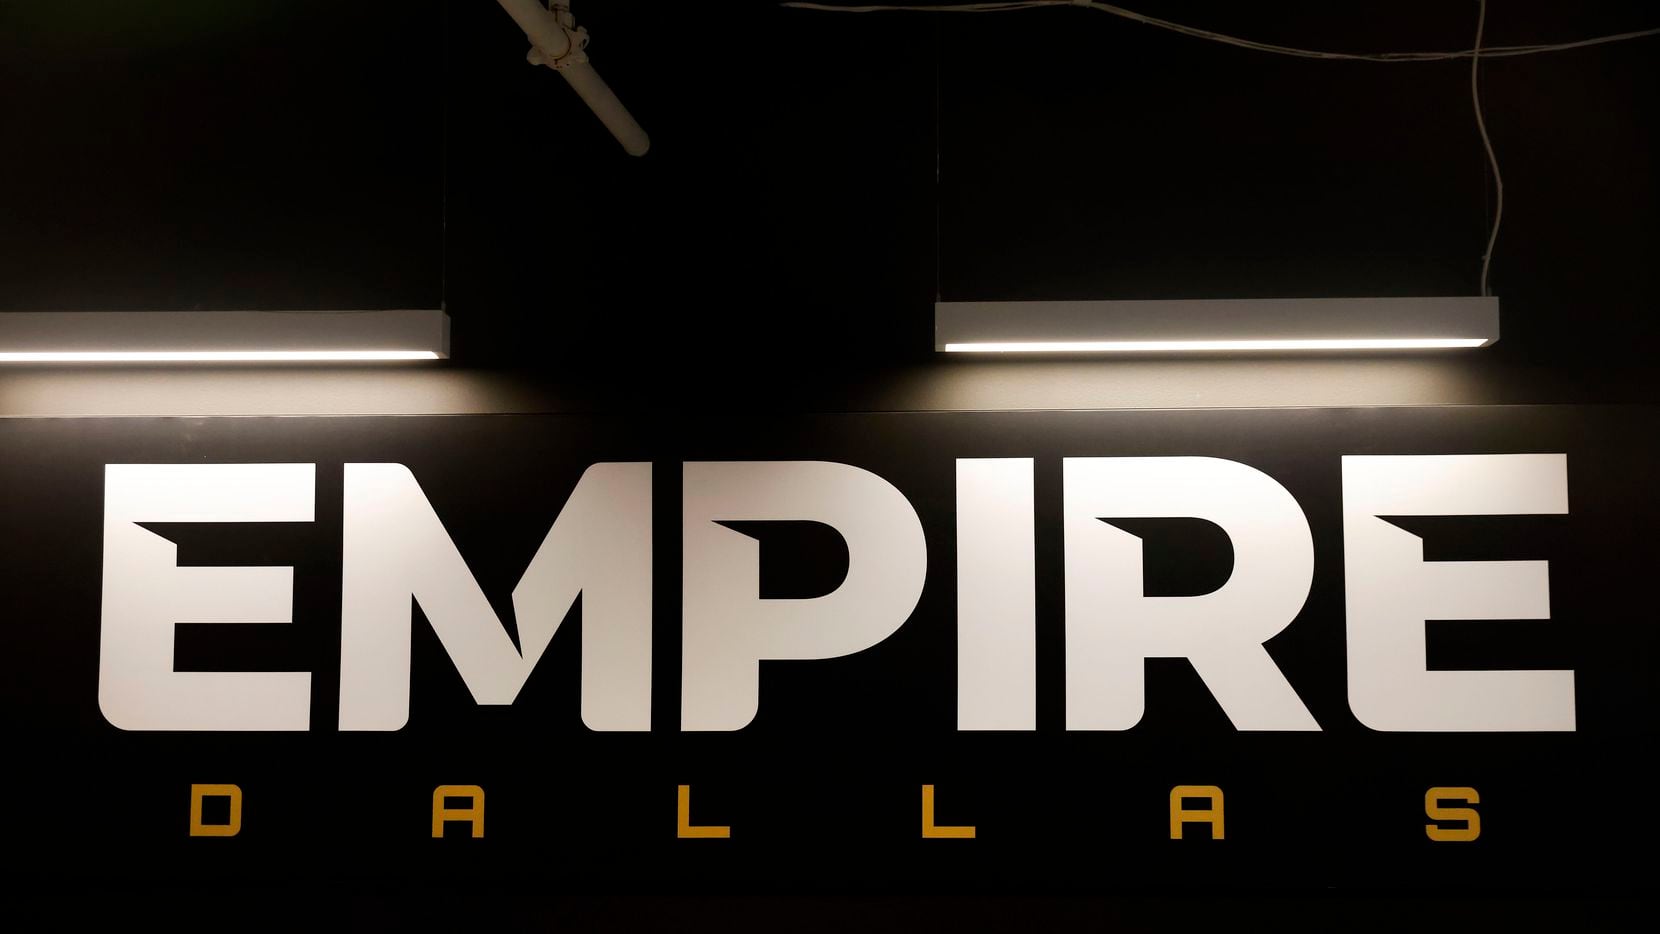 The Dallas Empire team in the Call of Duty League won the championship last year. They are...